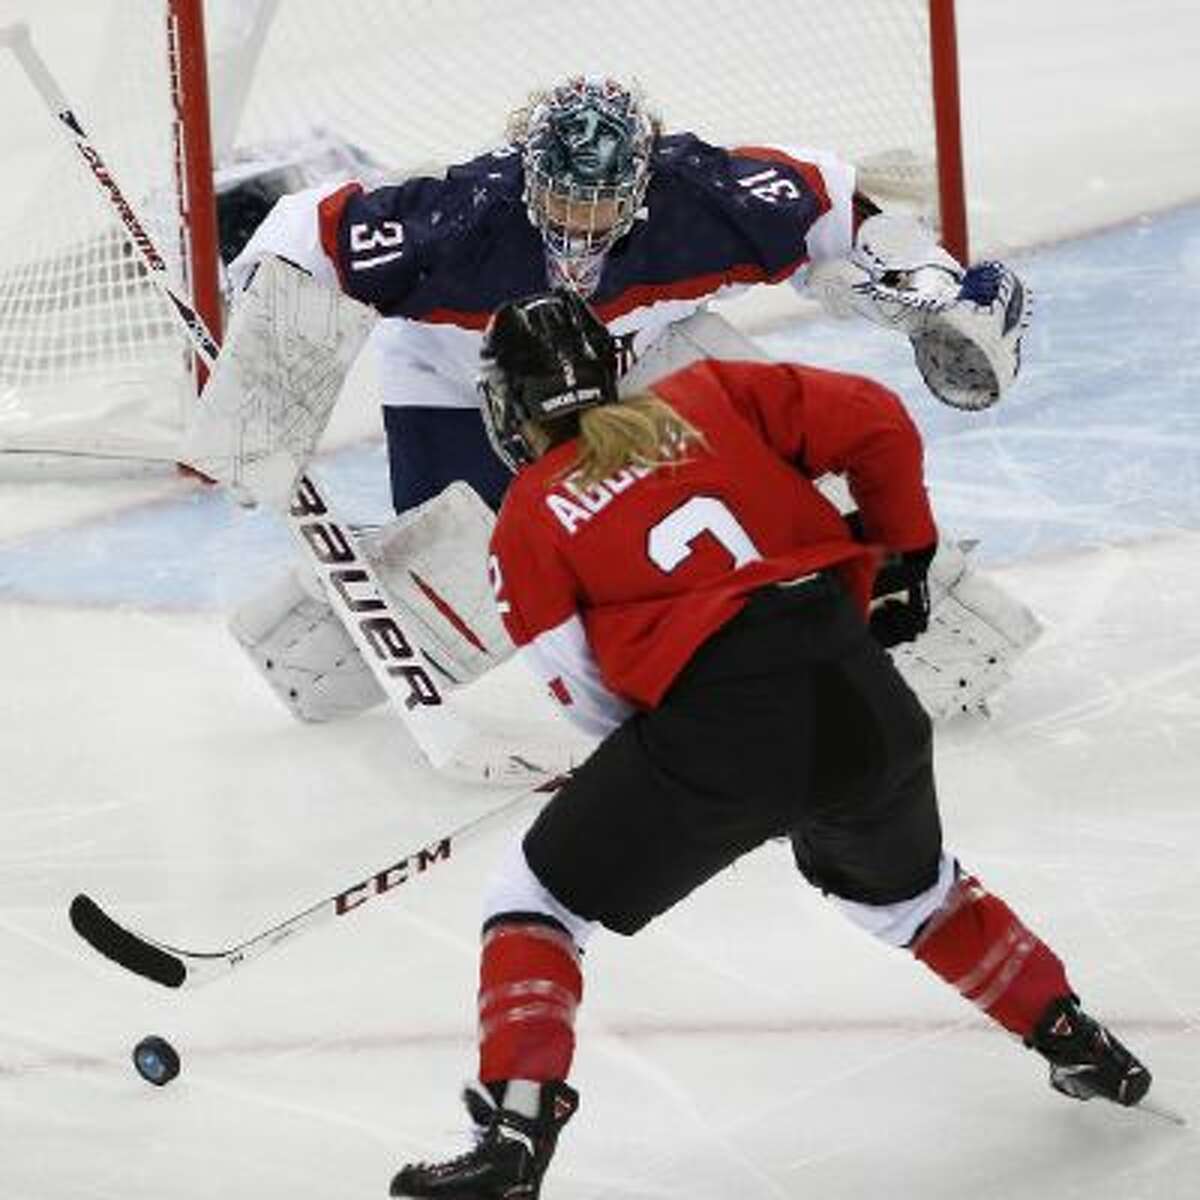 Meghan Agosta-Marciano of Canada shoots toward USA Goalkeeper Jessie Vetter during the first period of the 2014 Winter Olympics women's ice hockey game at Shayba Arena, Wednesday, Feb. 12, 2014, in Sochi, Russia.